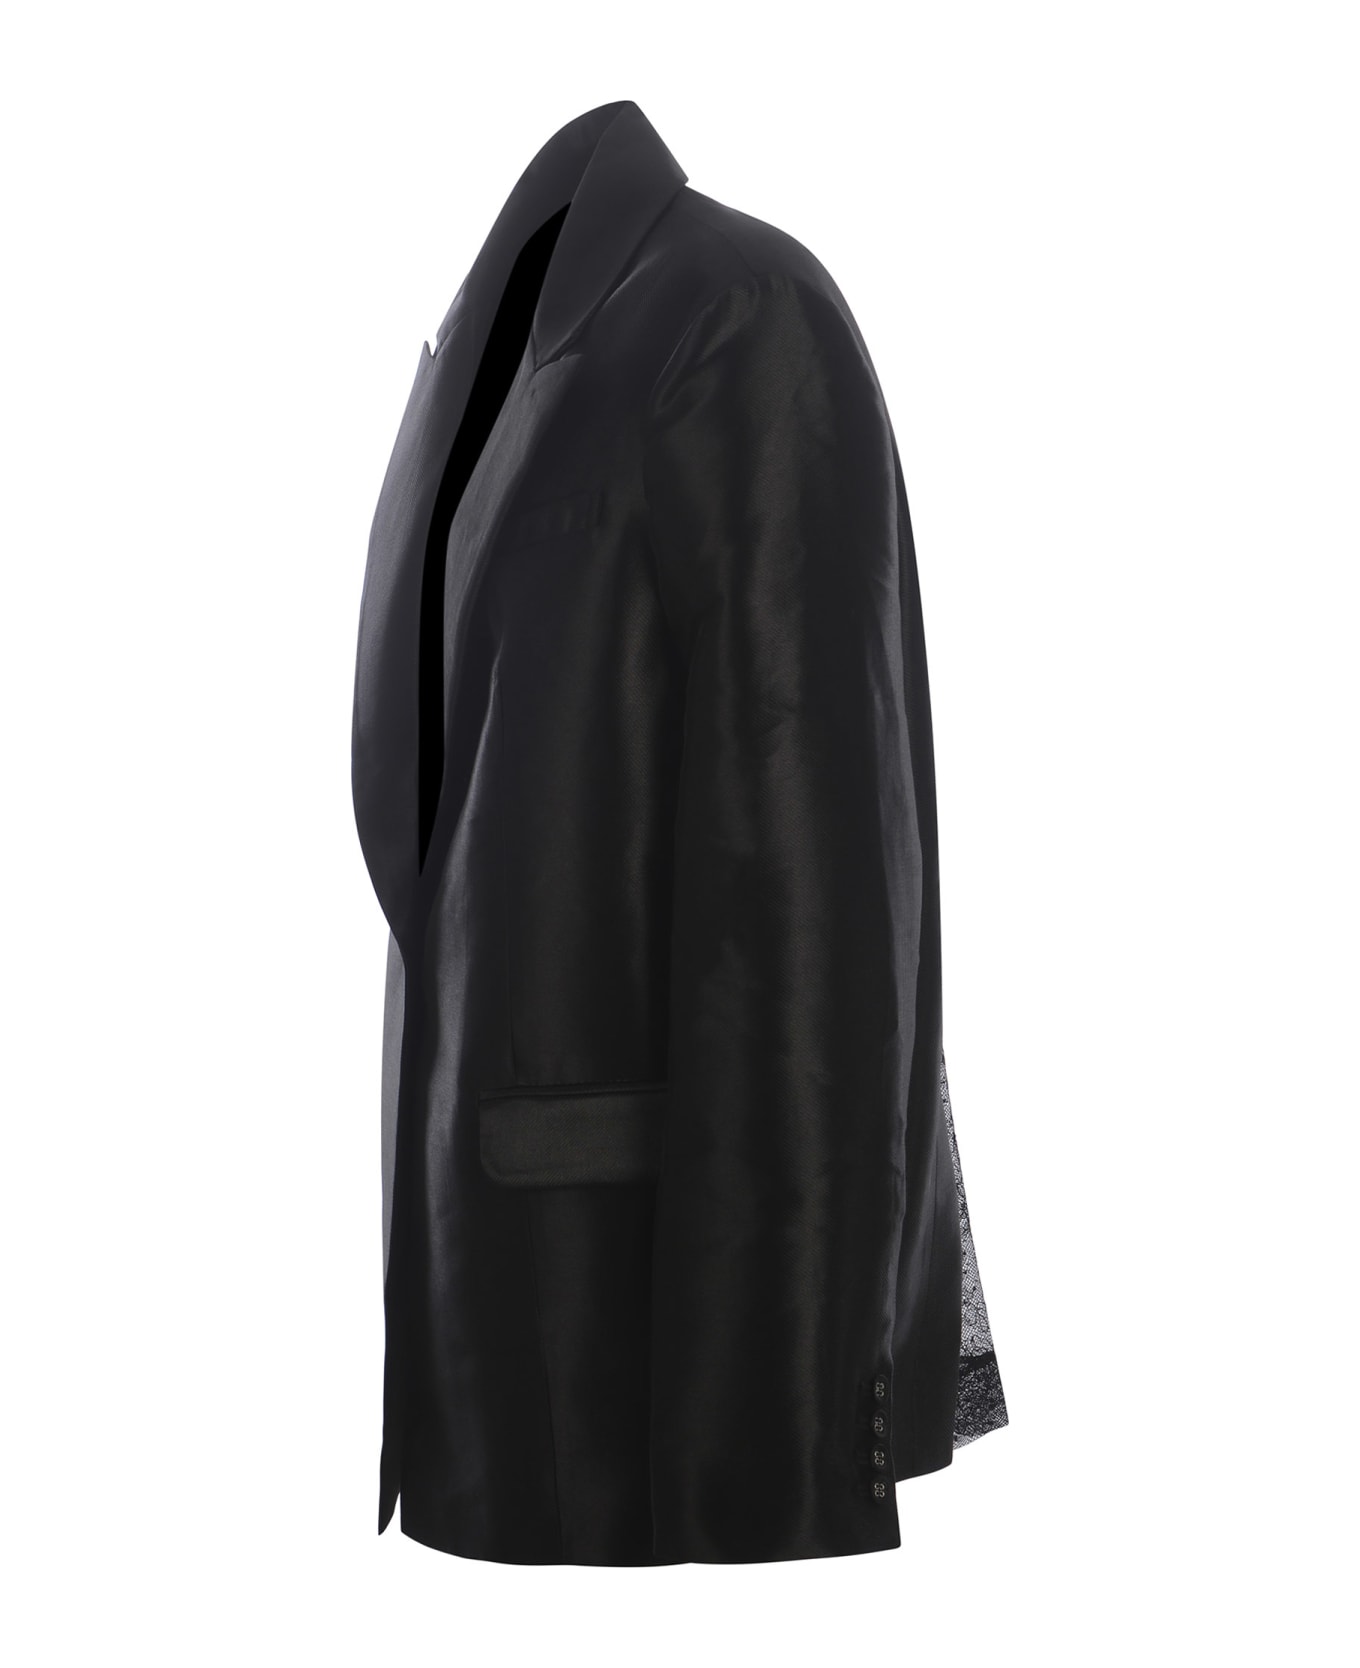 Rotate by Birger Christensen Jacket Rotate Made Of Viscose Blend - Nero